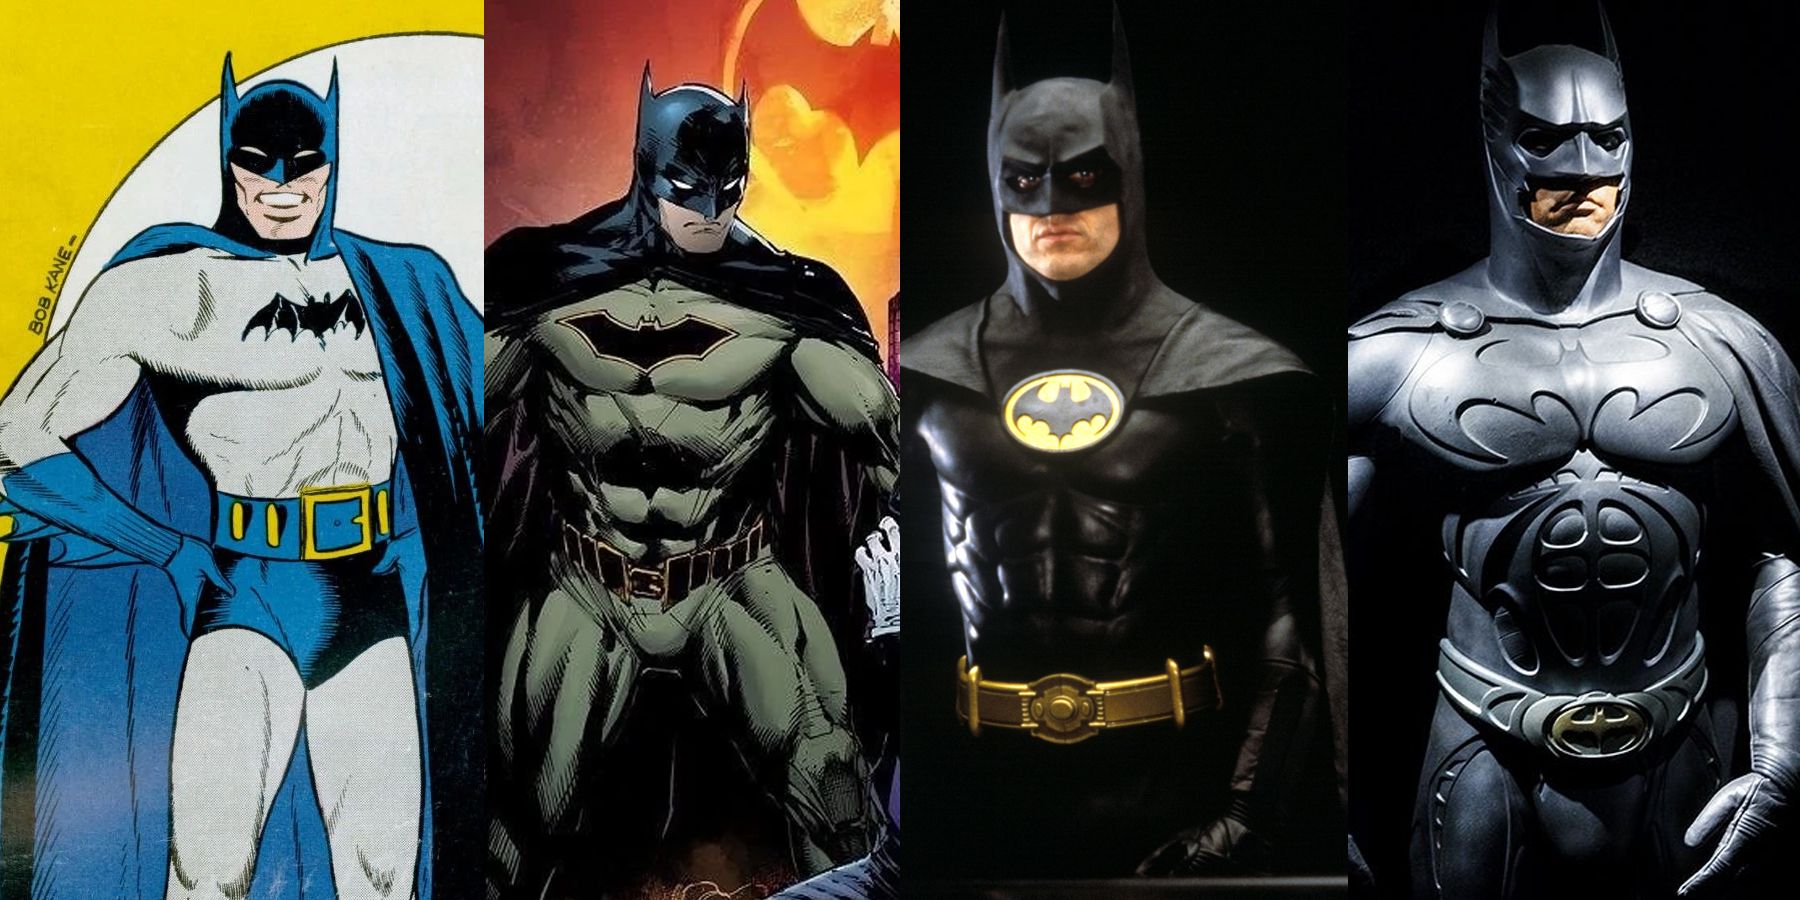 Batman Physiques in the Comics and Film